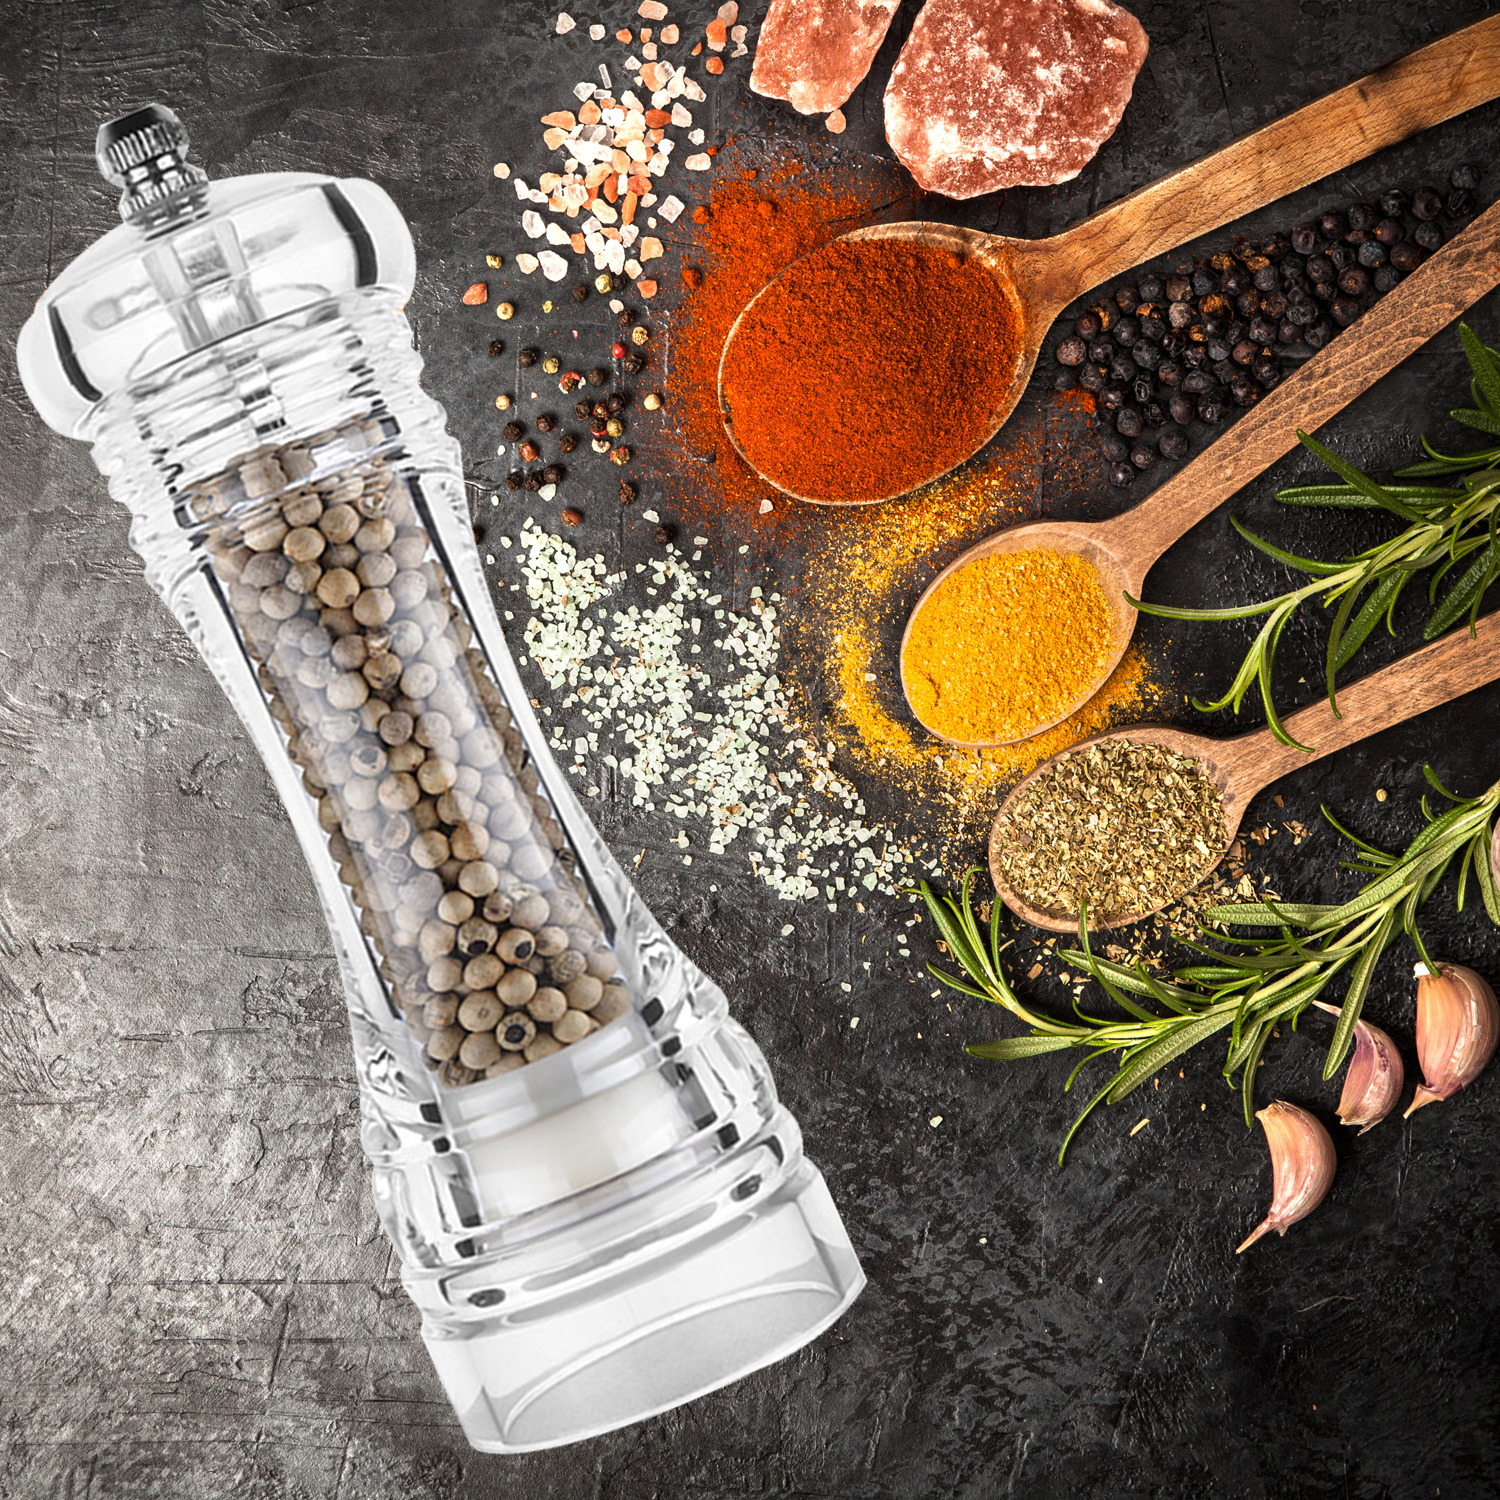 Acrylic Spices Mill Shaker Clear Ceramic Manual Pepper Sea Salt Grinder Kitchen Grinding Tool 4/5/6 Inch